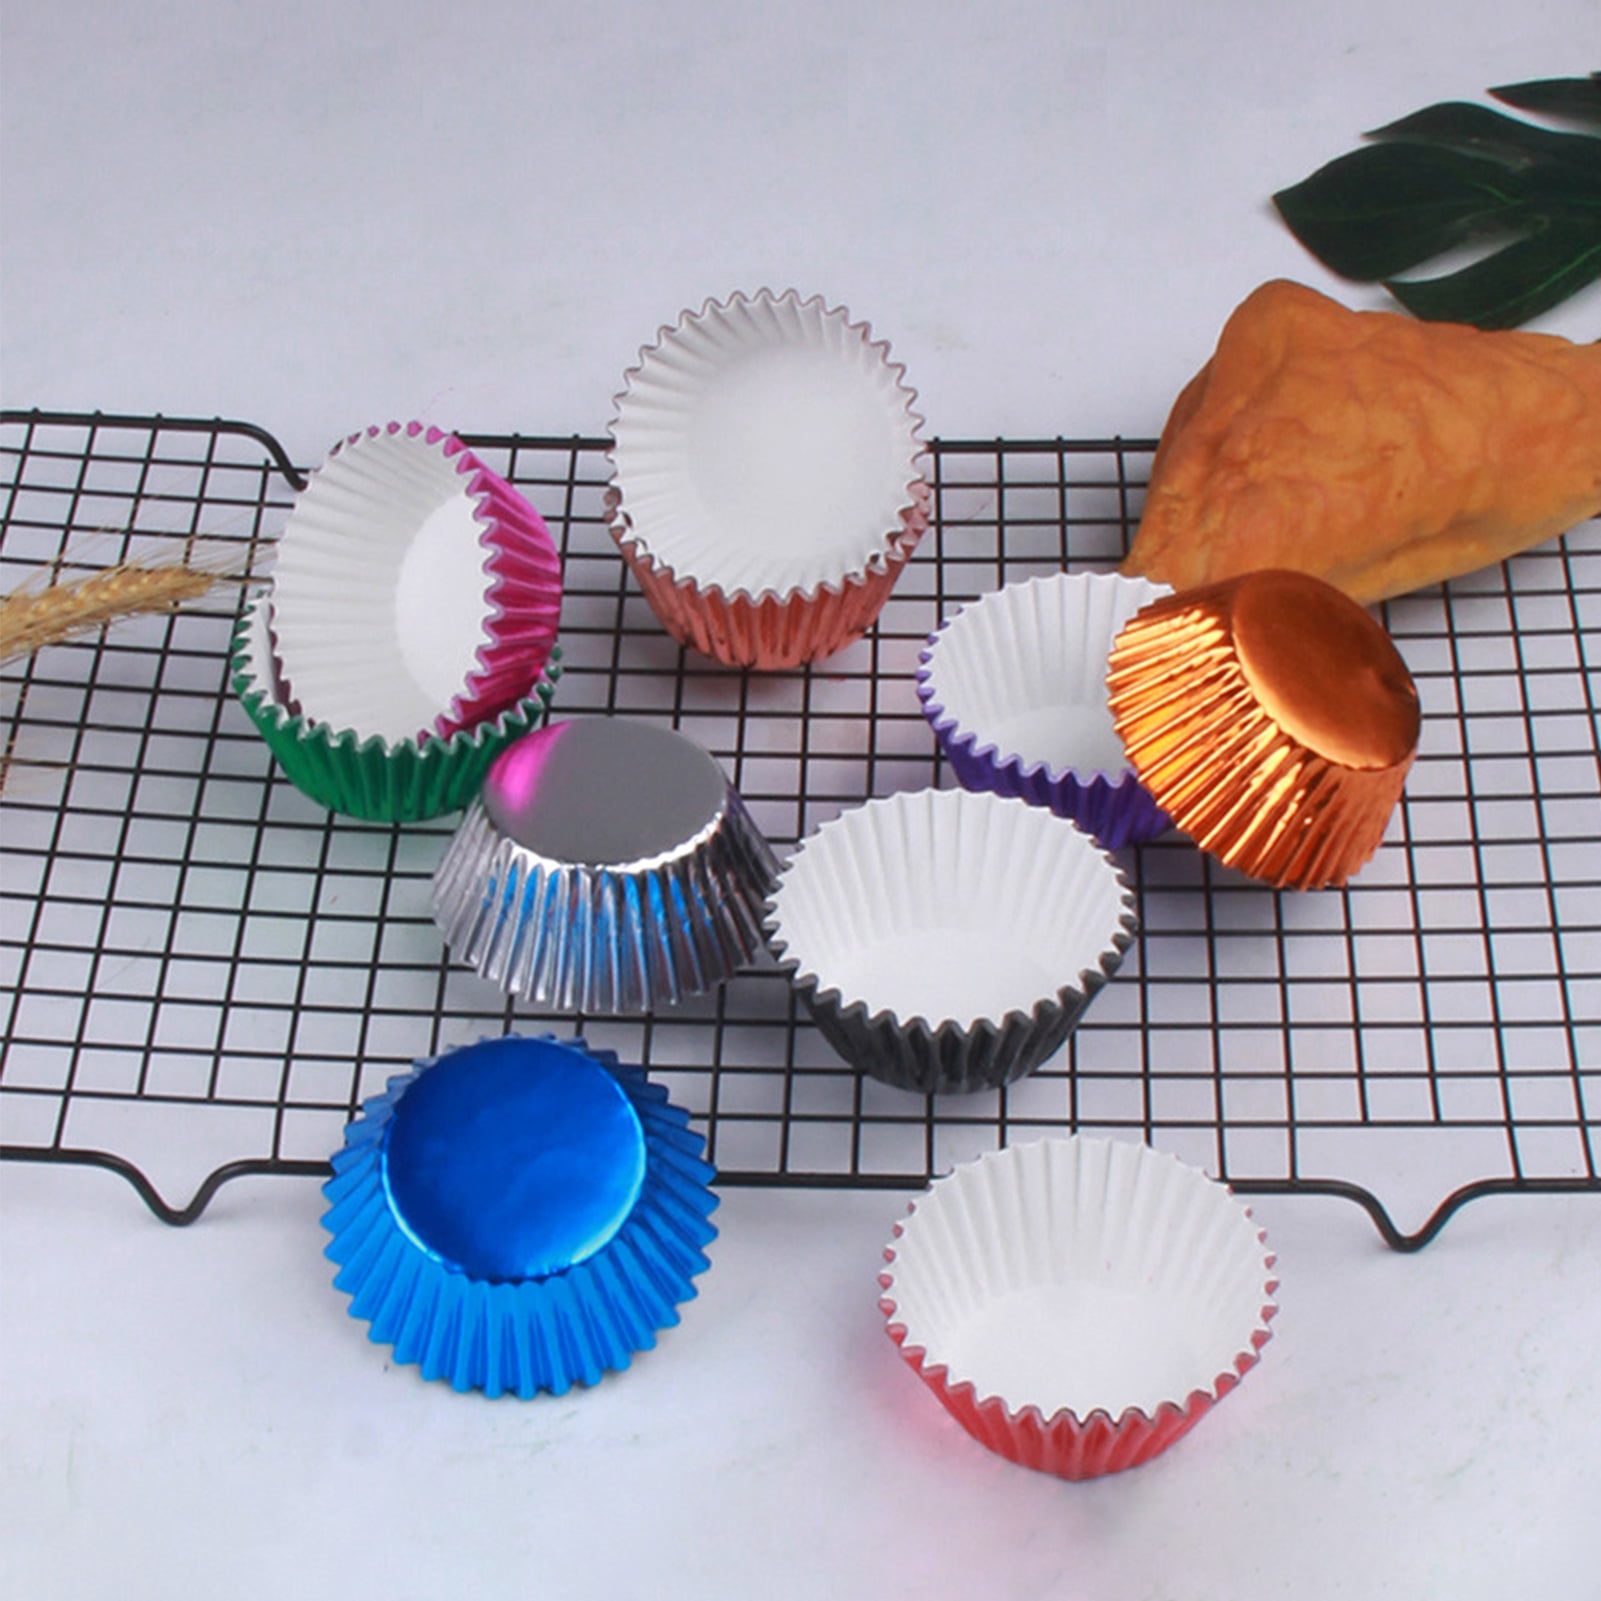 100X Professional Foil Cupcake Muffin Cases Gadgets Mold Baking Cooking Cookies